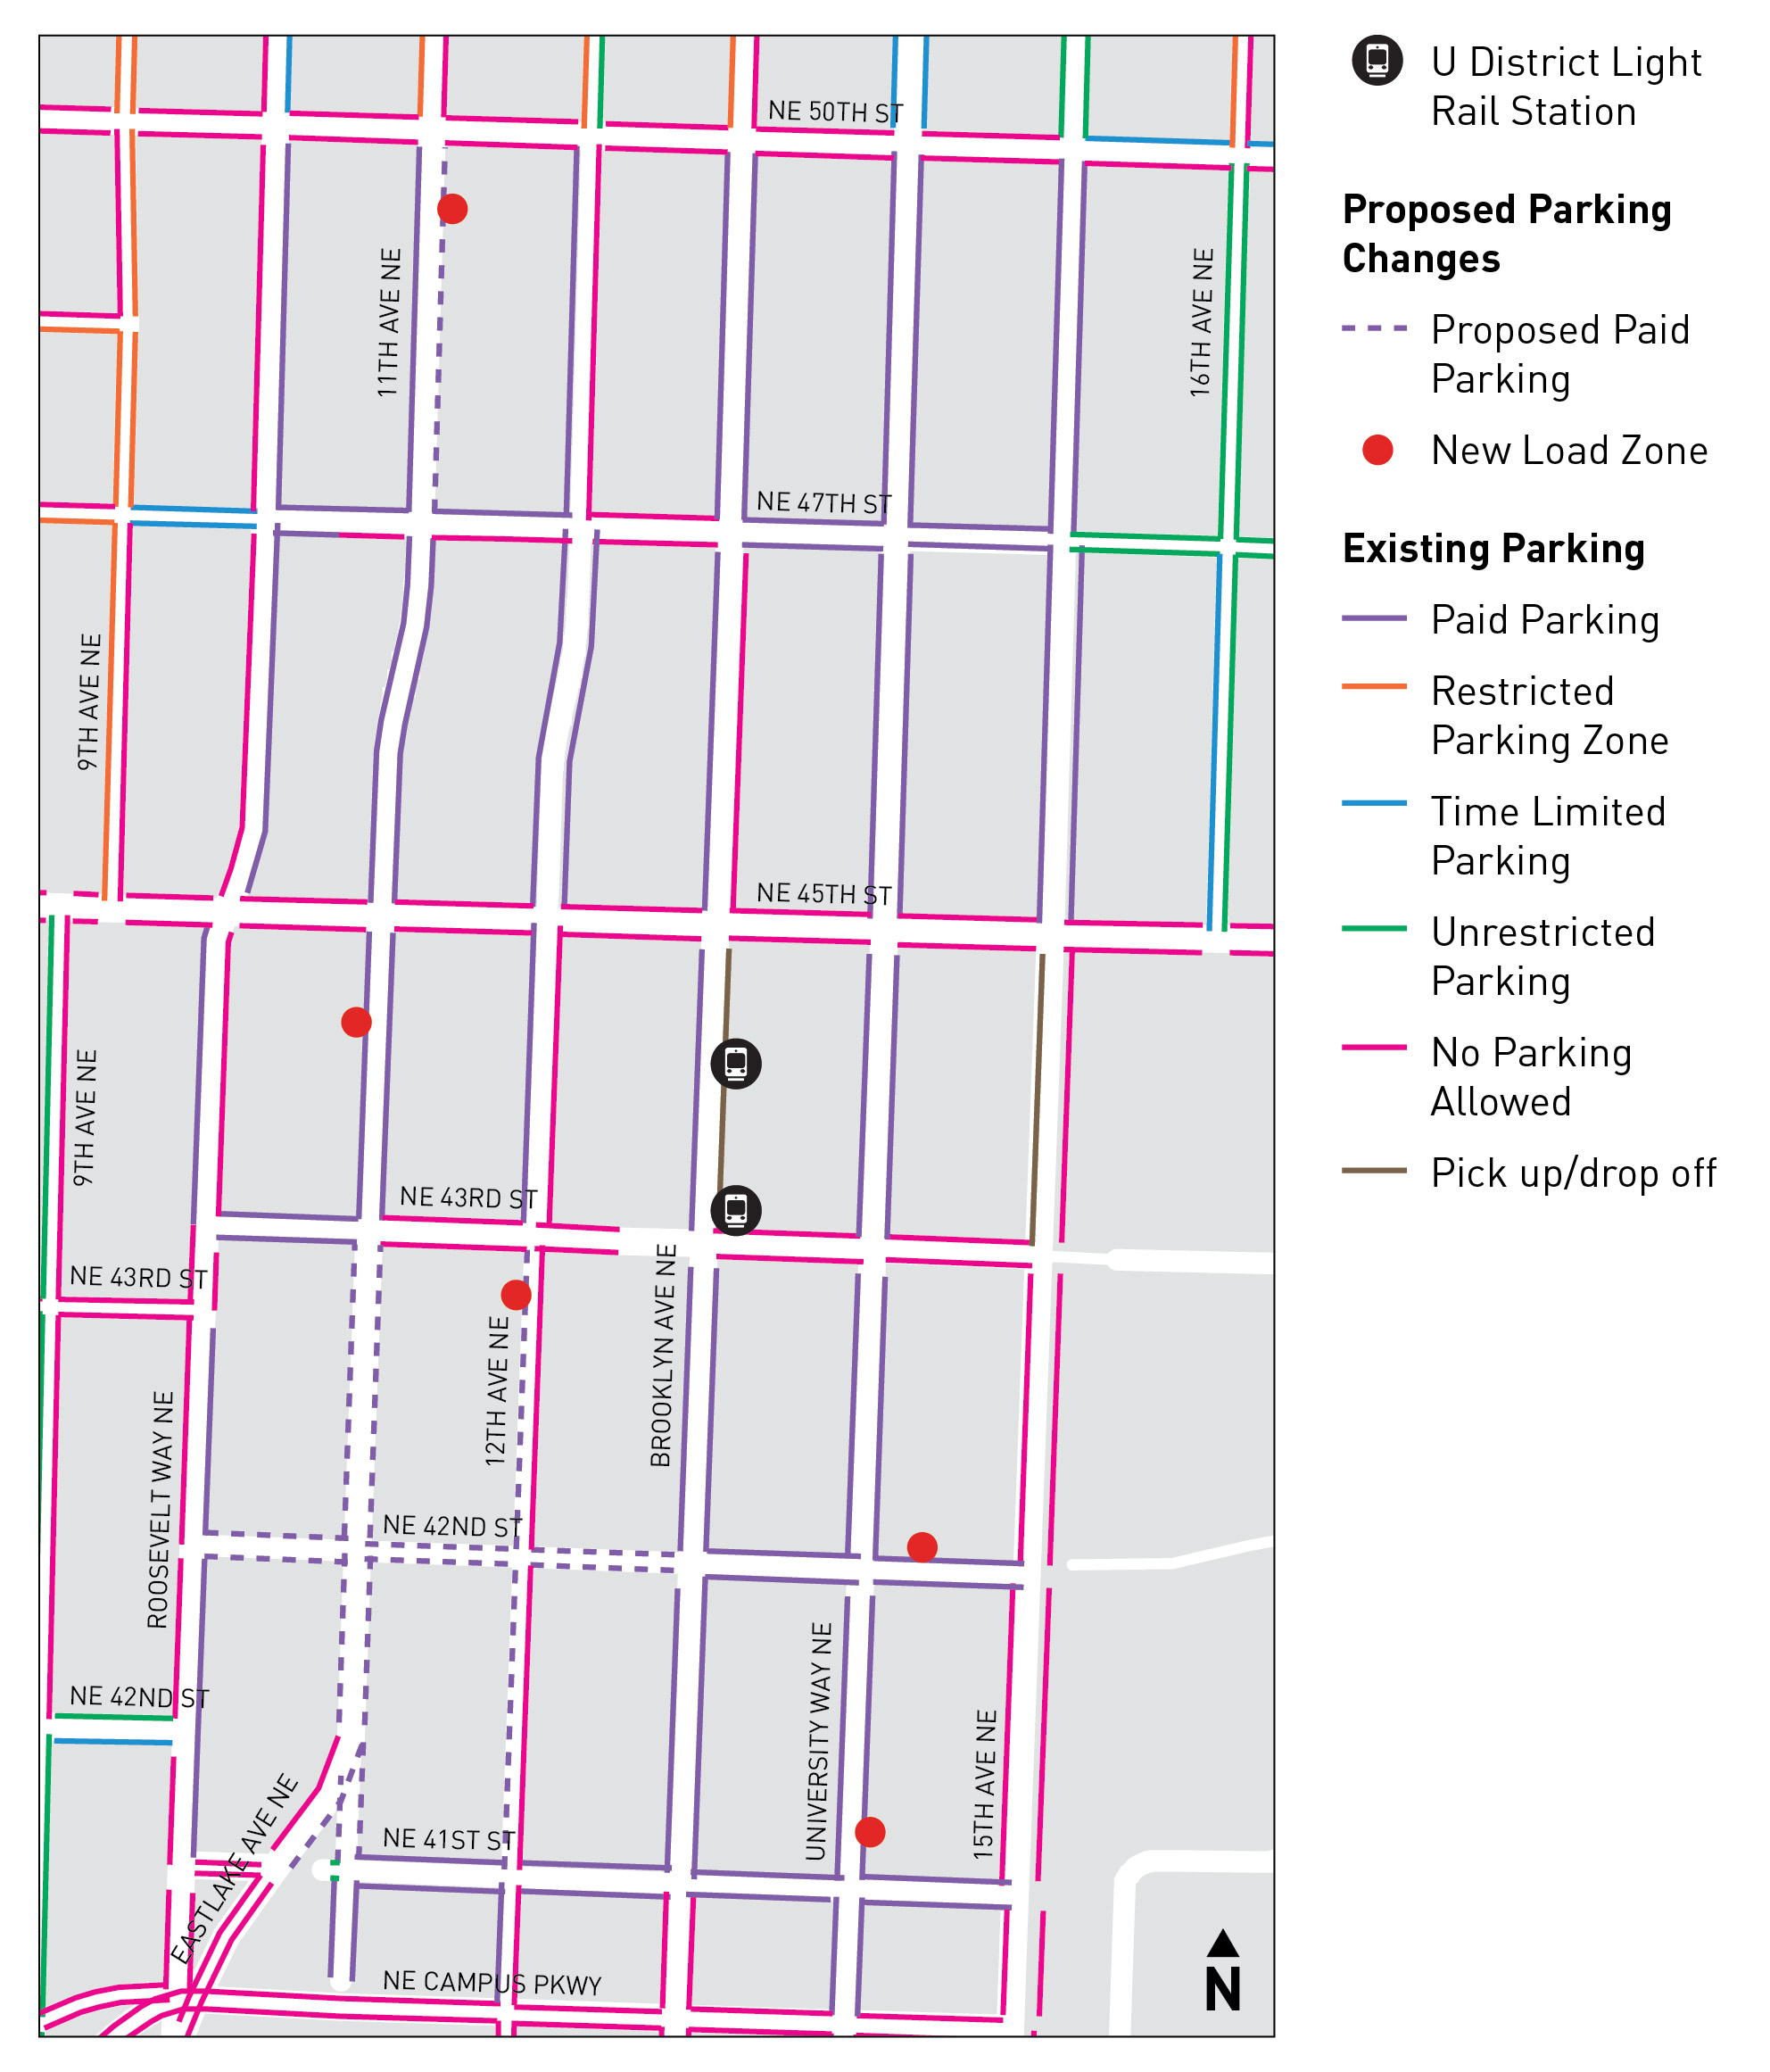 Map of curb changes around U-district Light Rail station